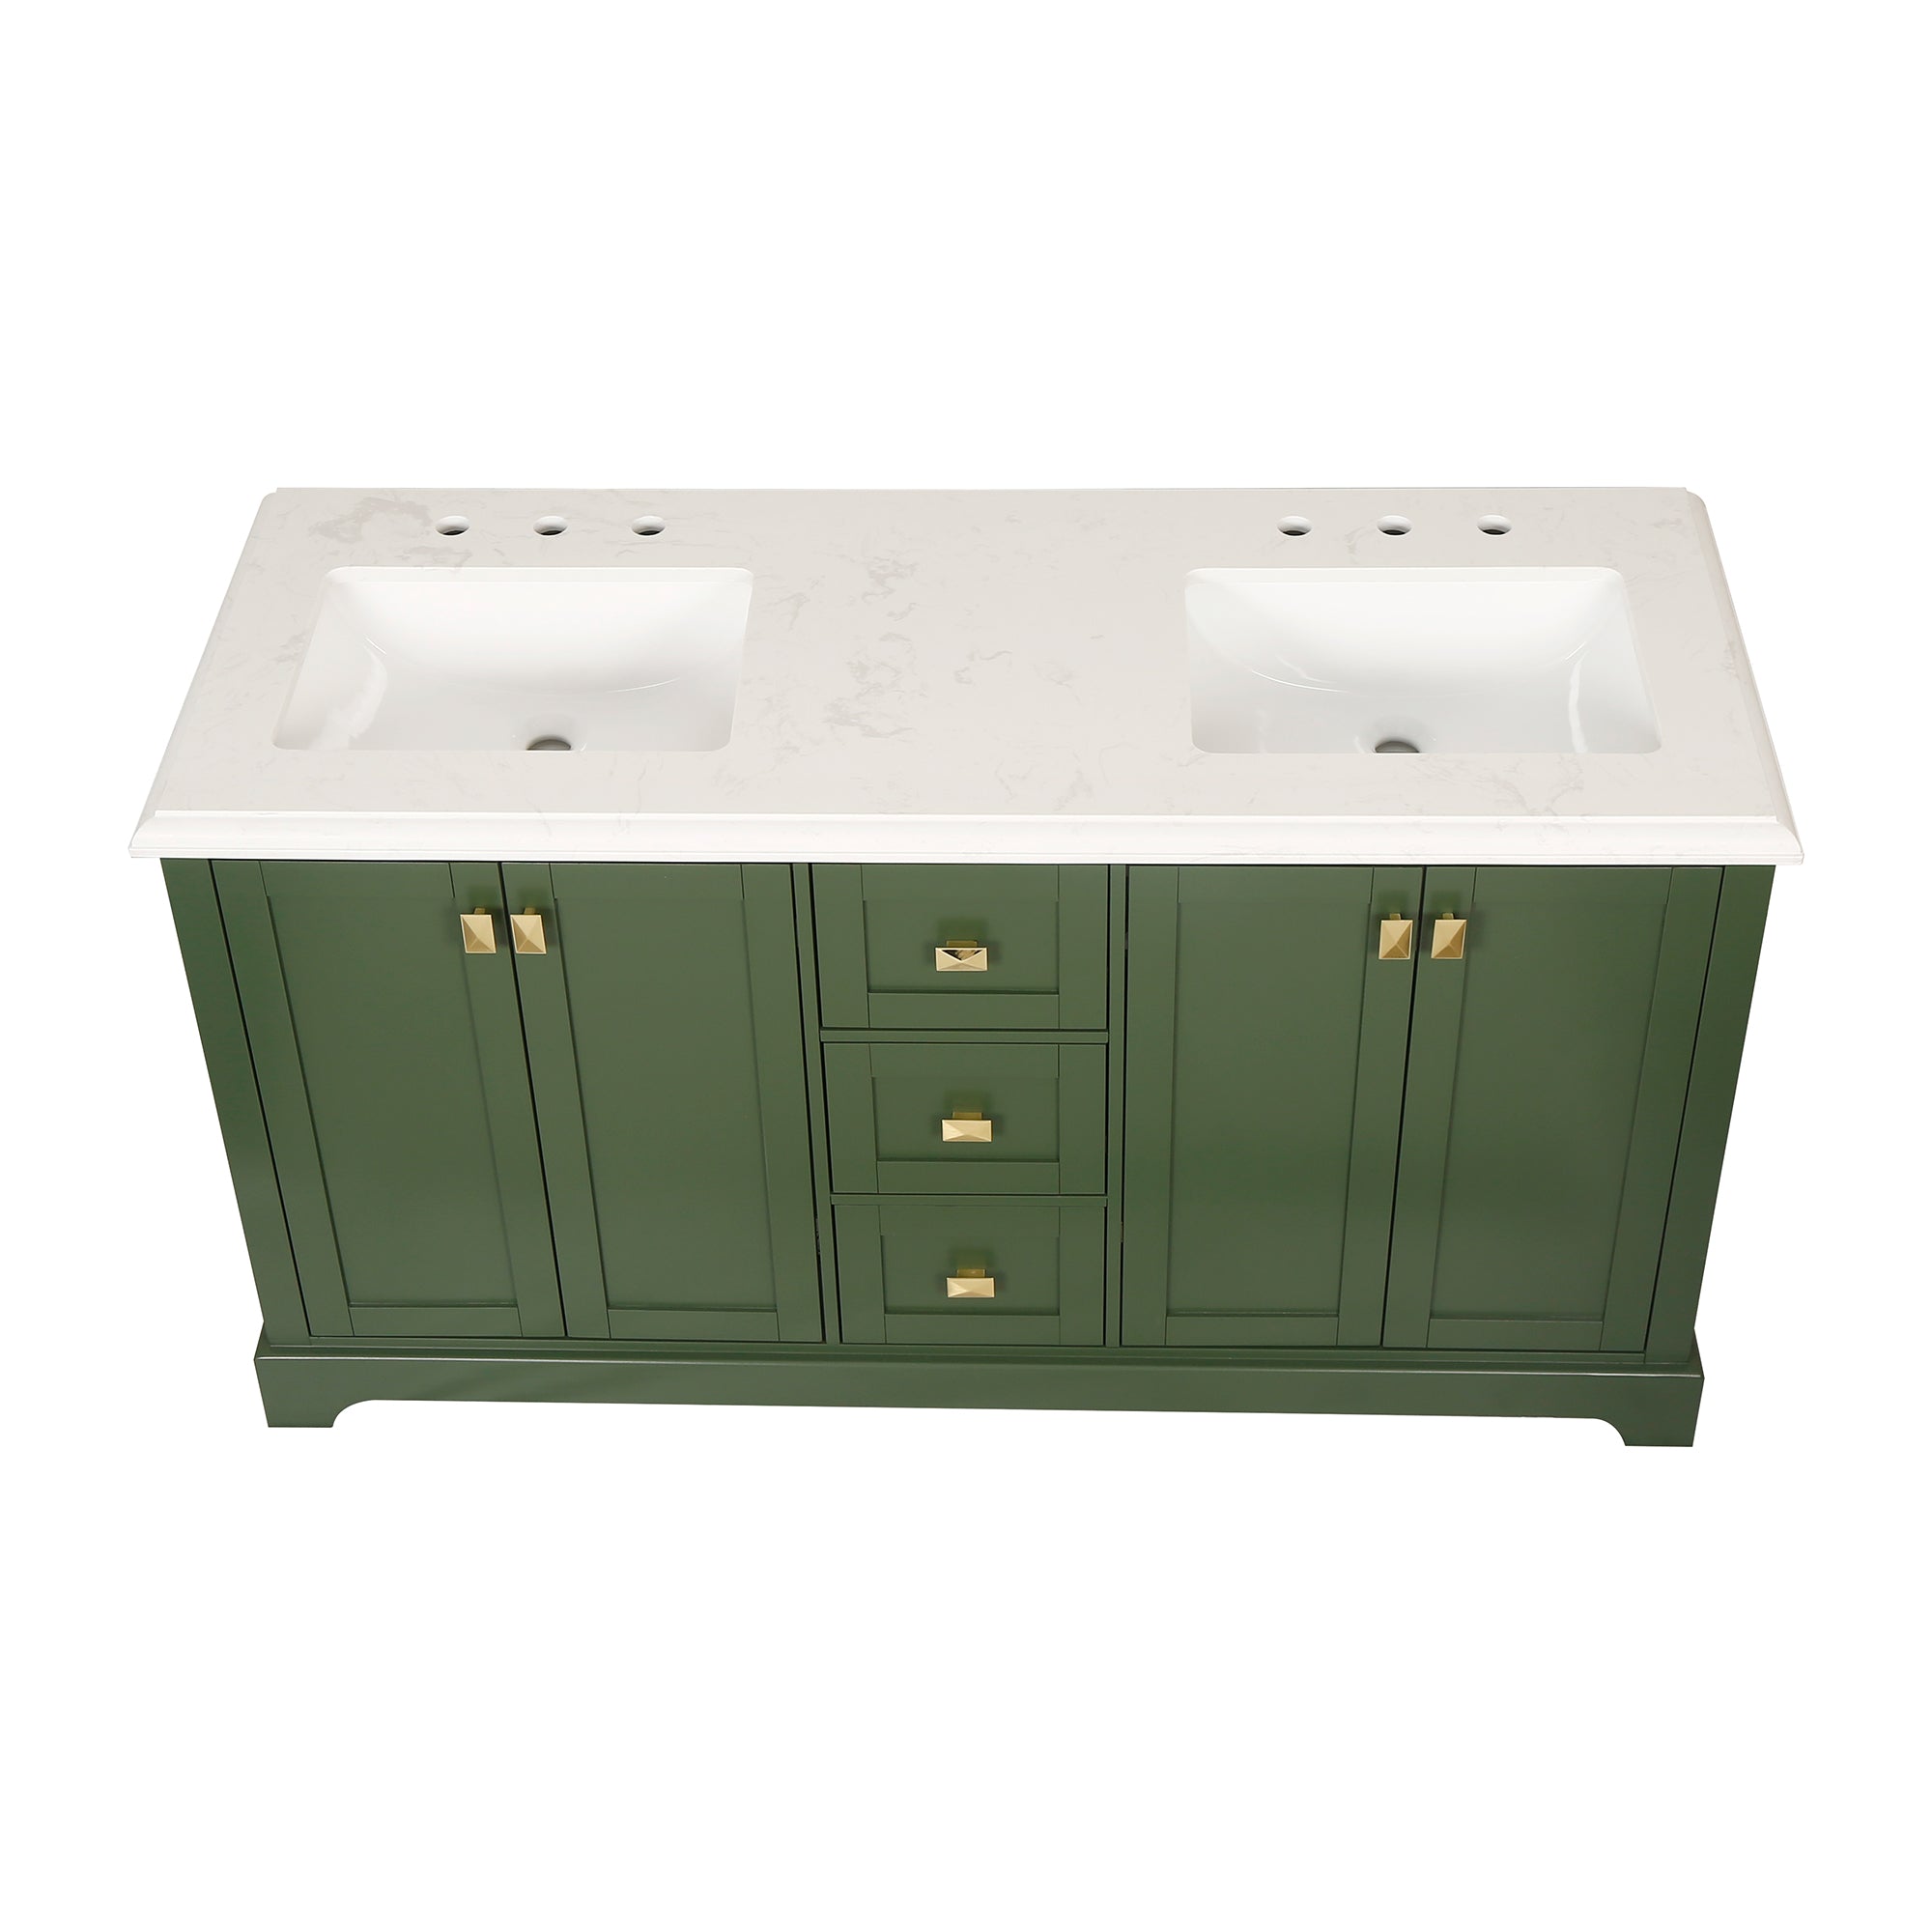 60" Free Standing Double Bathroom Vanity with Natural Marble Top RX-V02-60